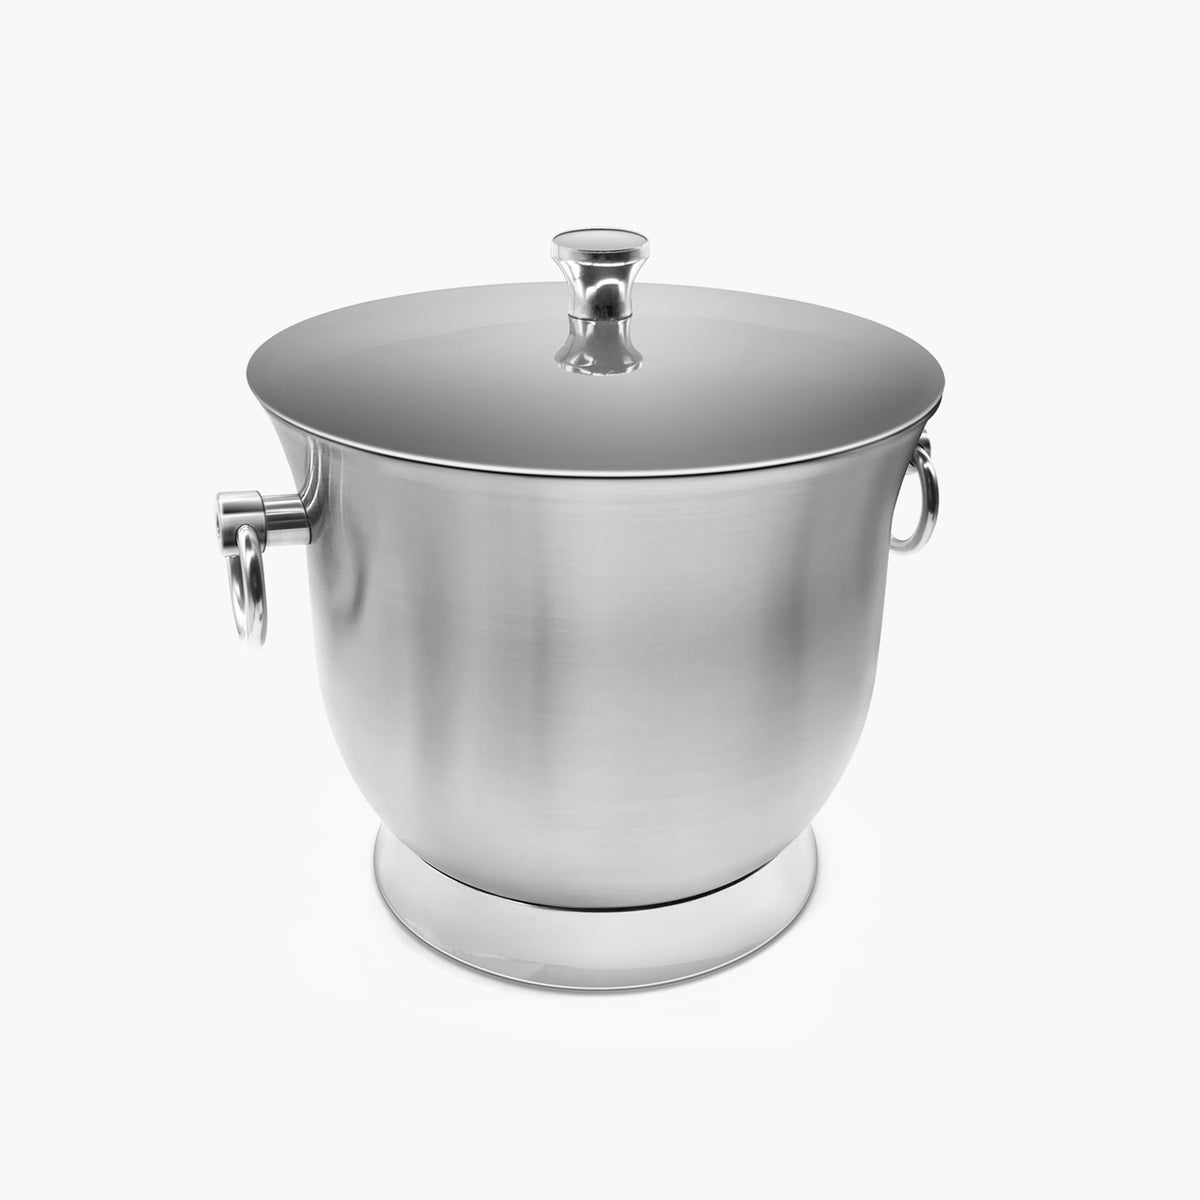 Fortune Candy 4-Quart Saucepan with Lid, Tri-Ply, 18/8 Stainless Steel,  Advanced Welding Technology, Mirror Finish